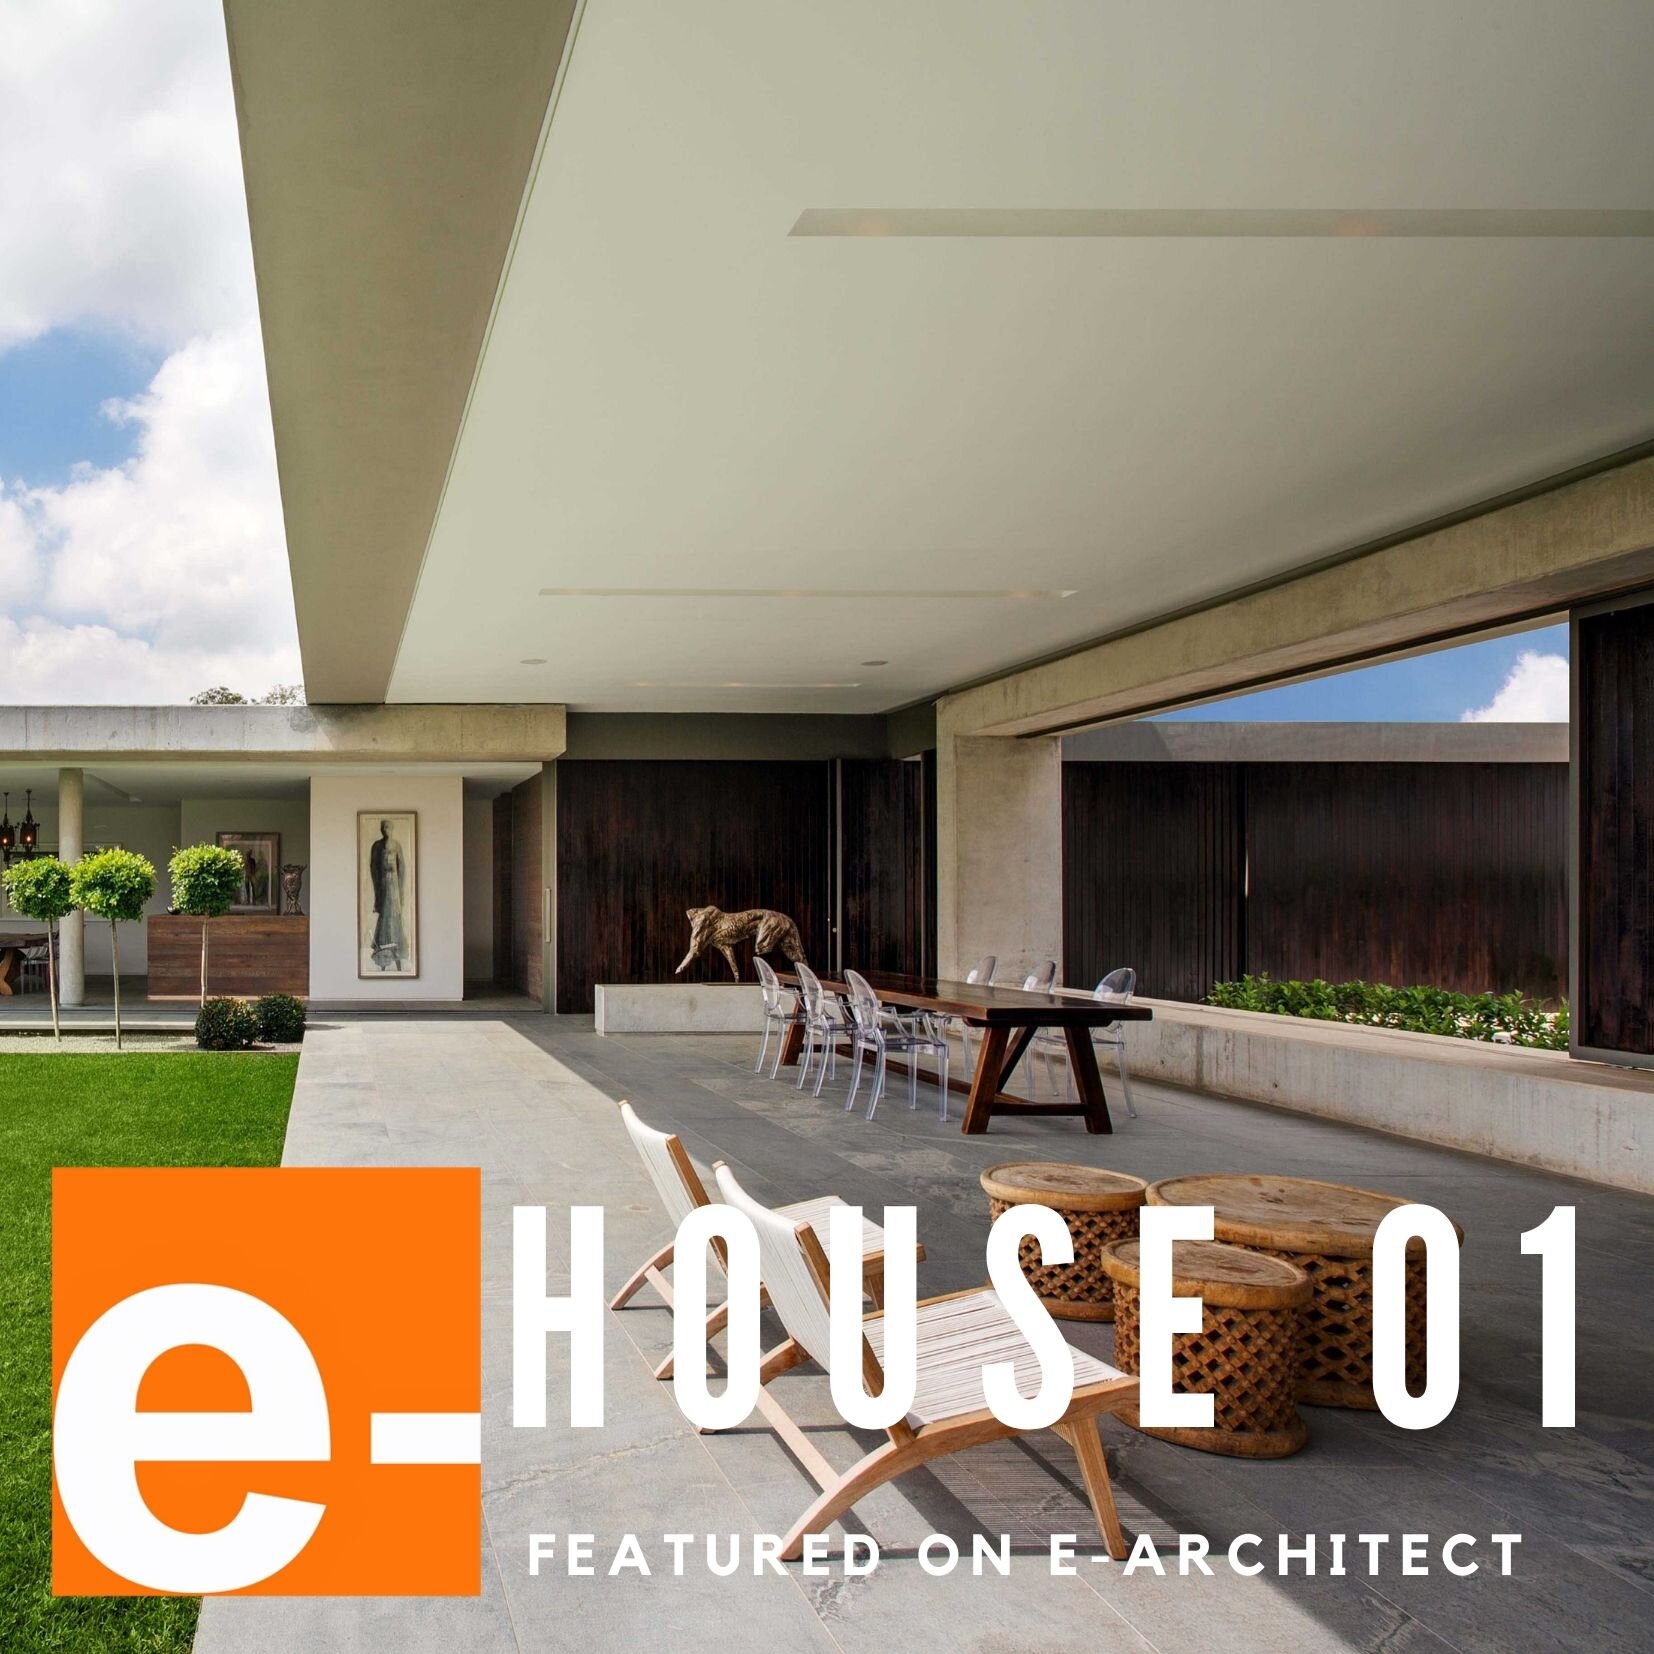 House 01 featured on E-Architect (Copy)